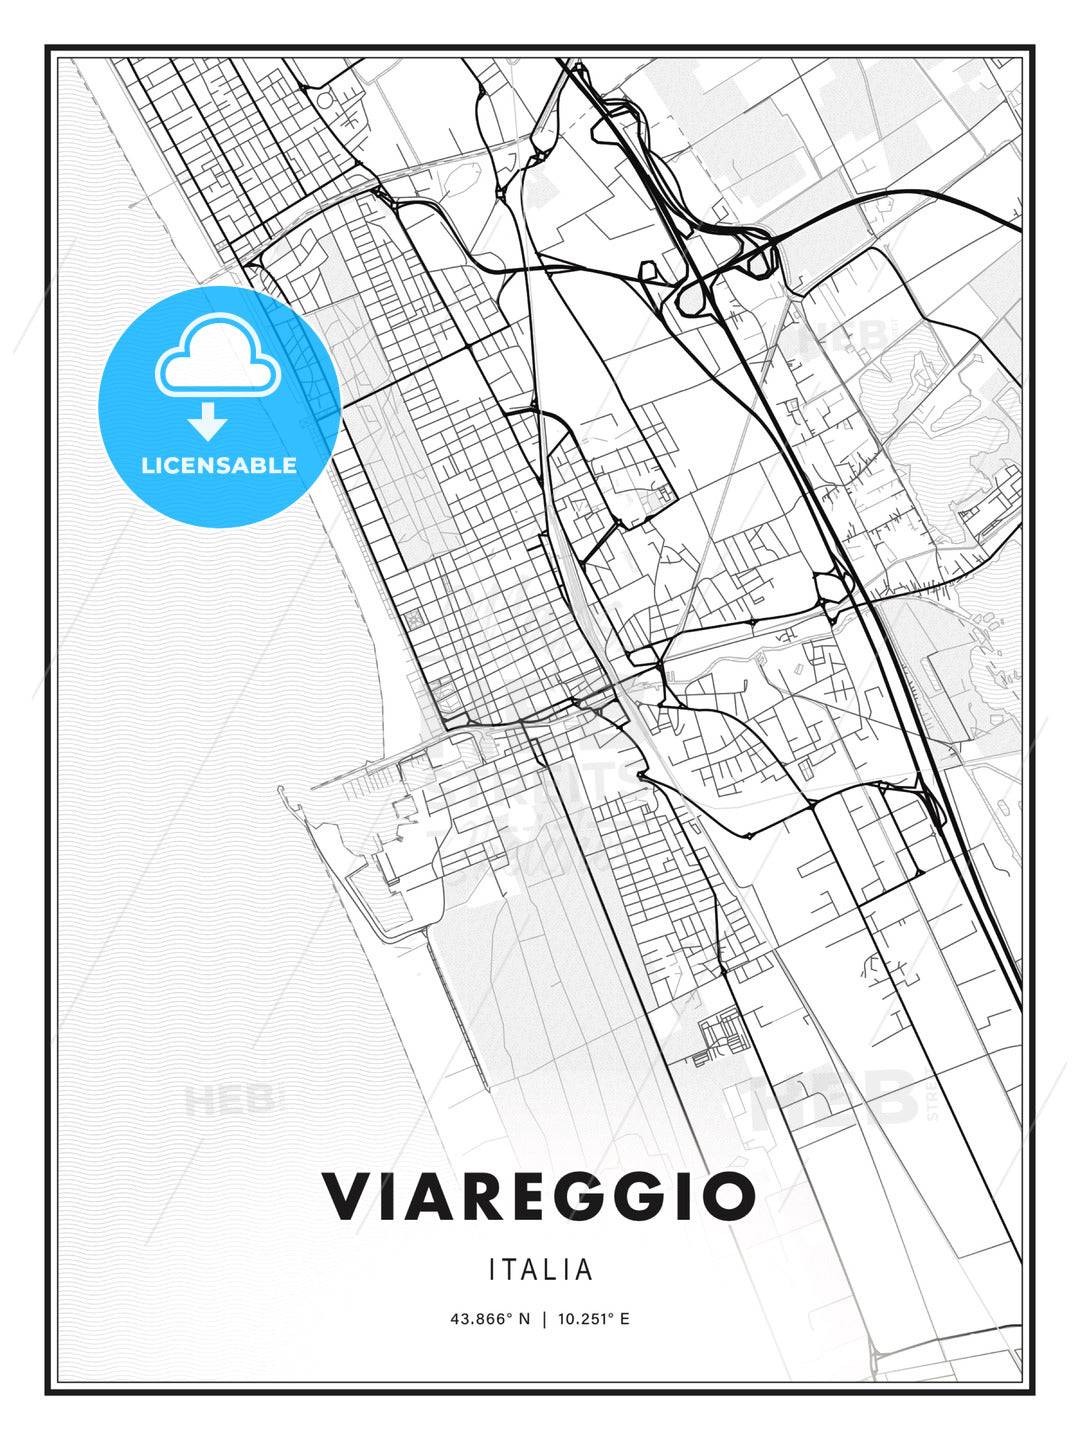 Viareggio, Italy, Modern Print Template in Various Formats - HEBSTREITS Sketches